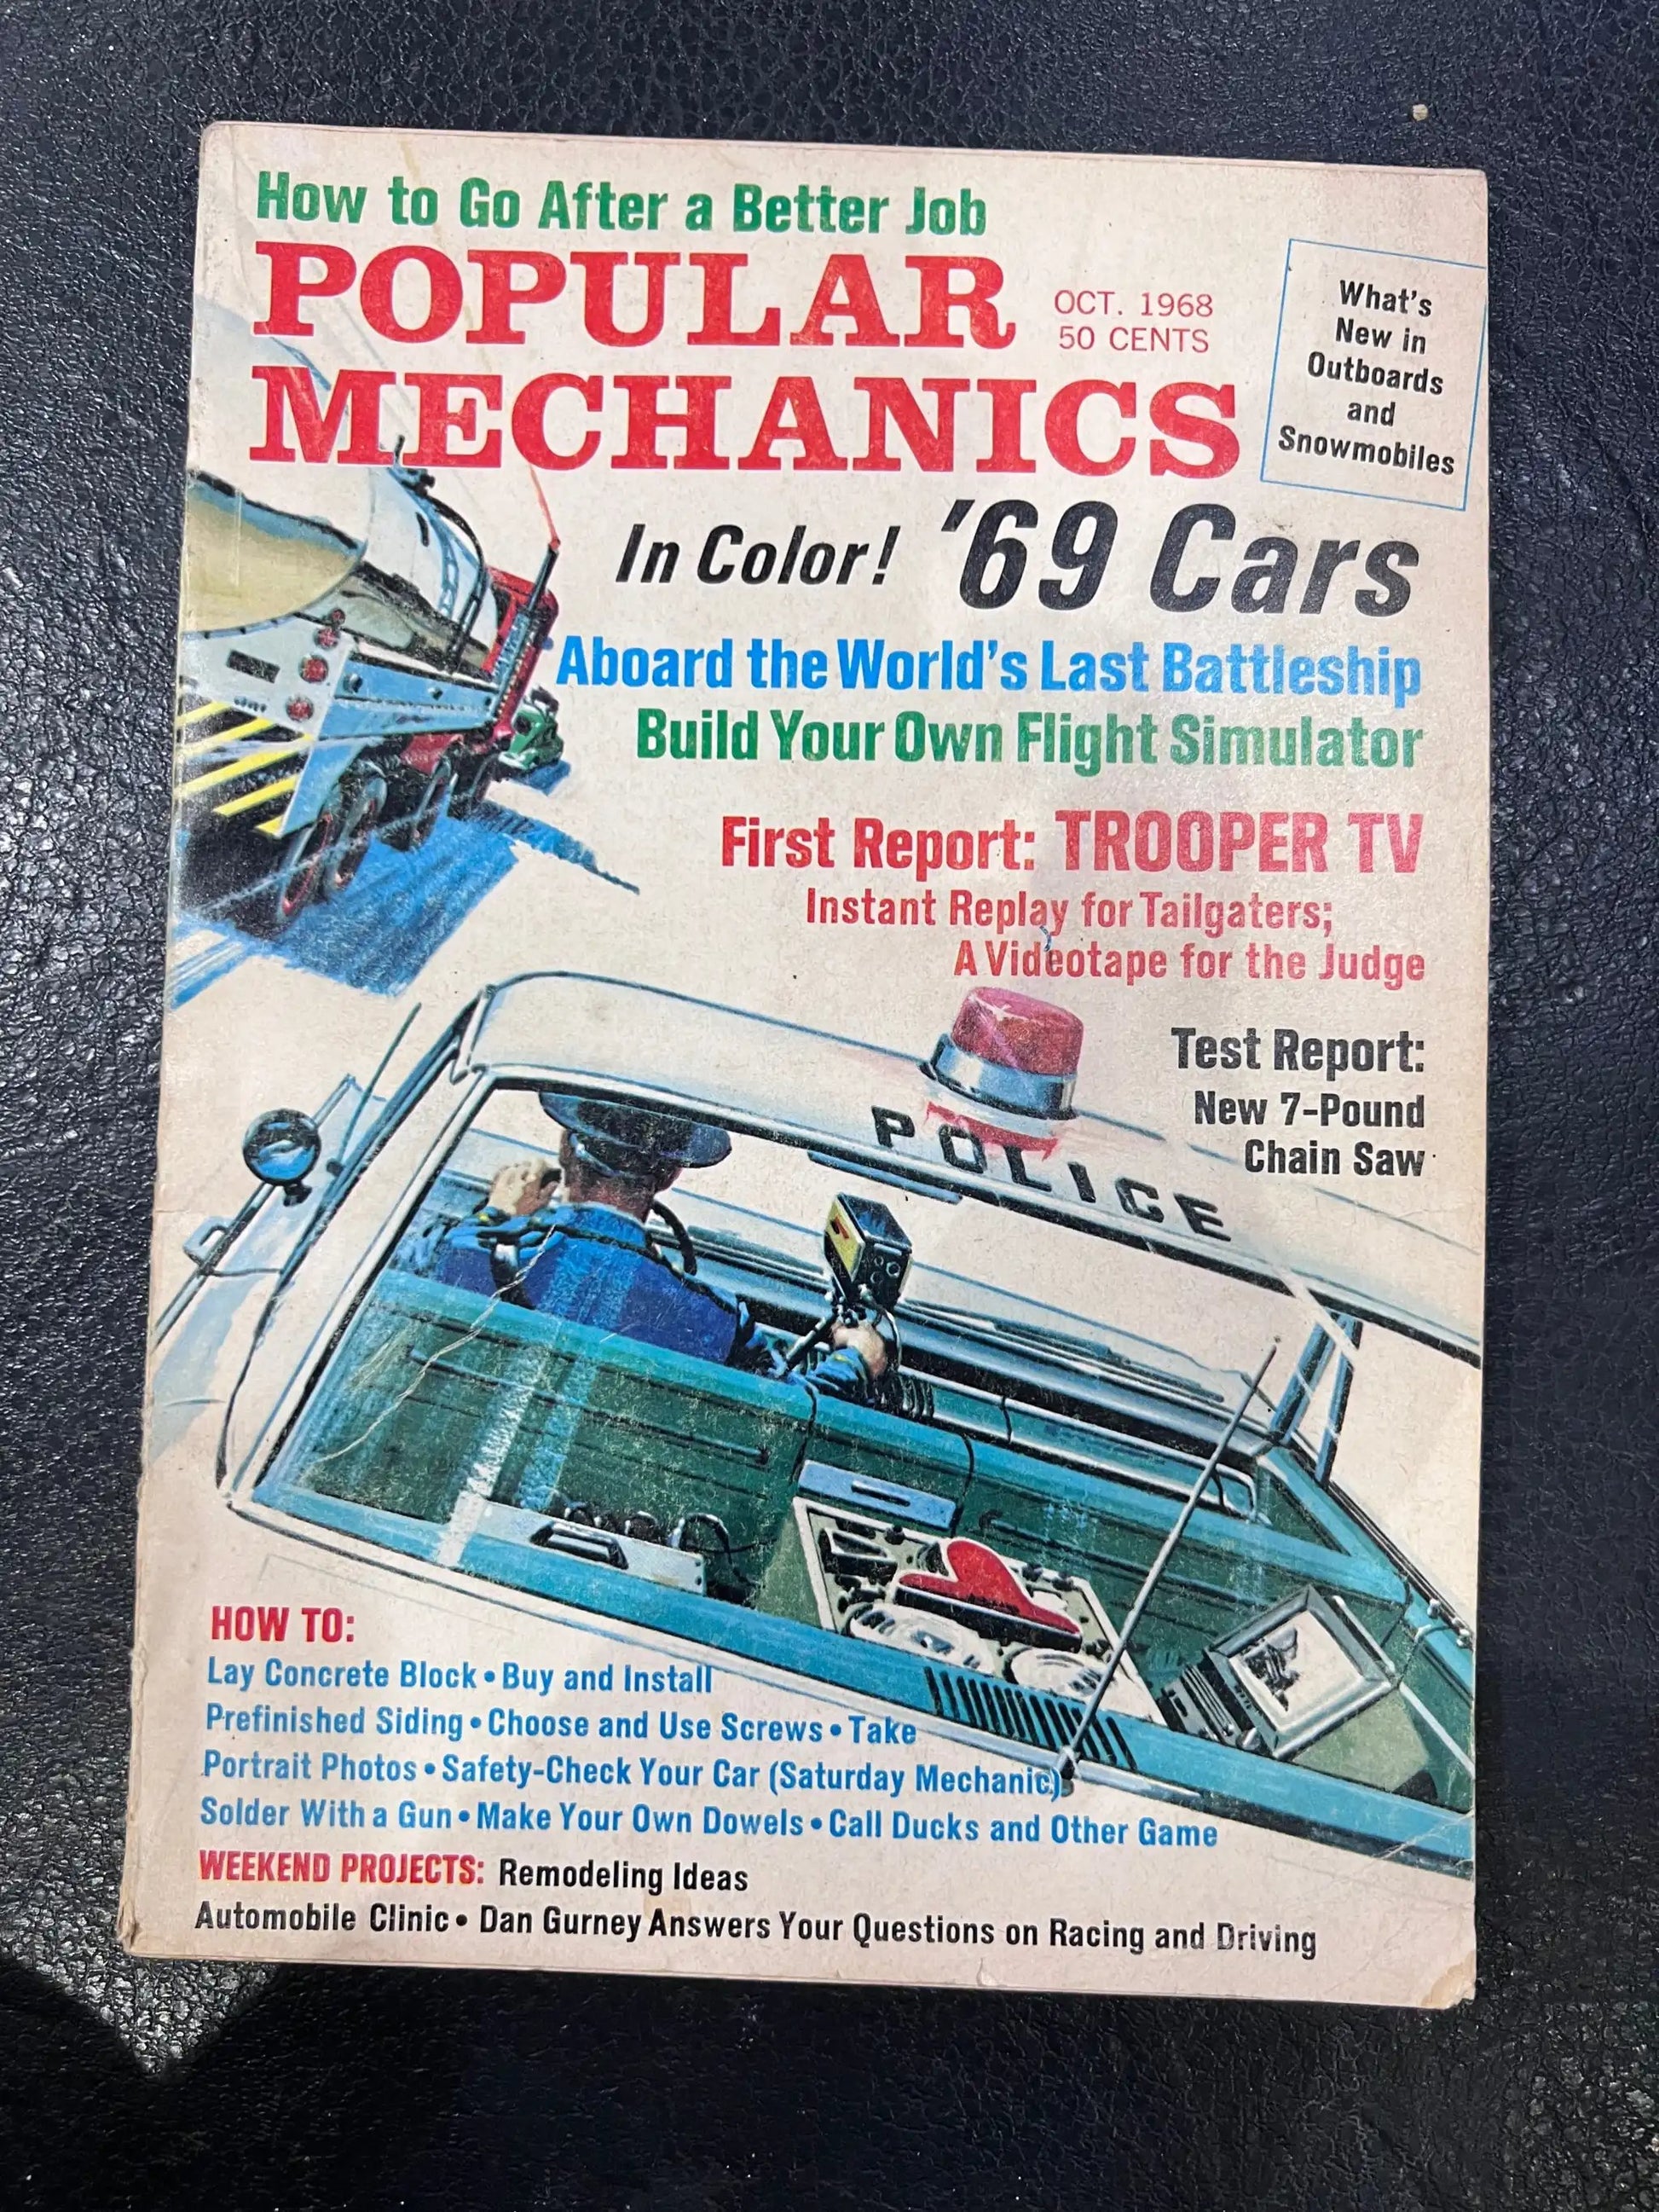 October 1968 Original Popular Mechanics Vintage New Old Stock Brochure Relic has been stored away safely for decades and is in very good NOS Condition Great Treasure